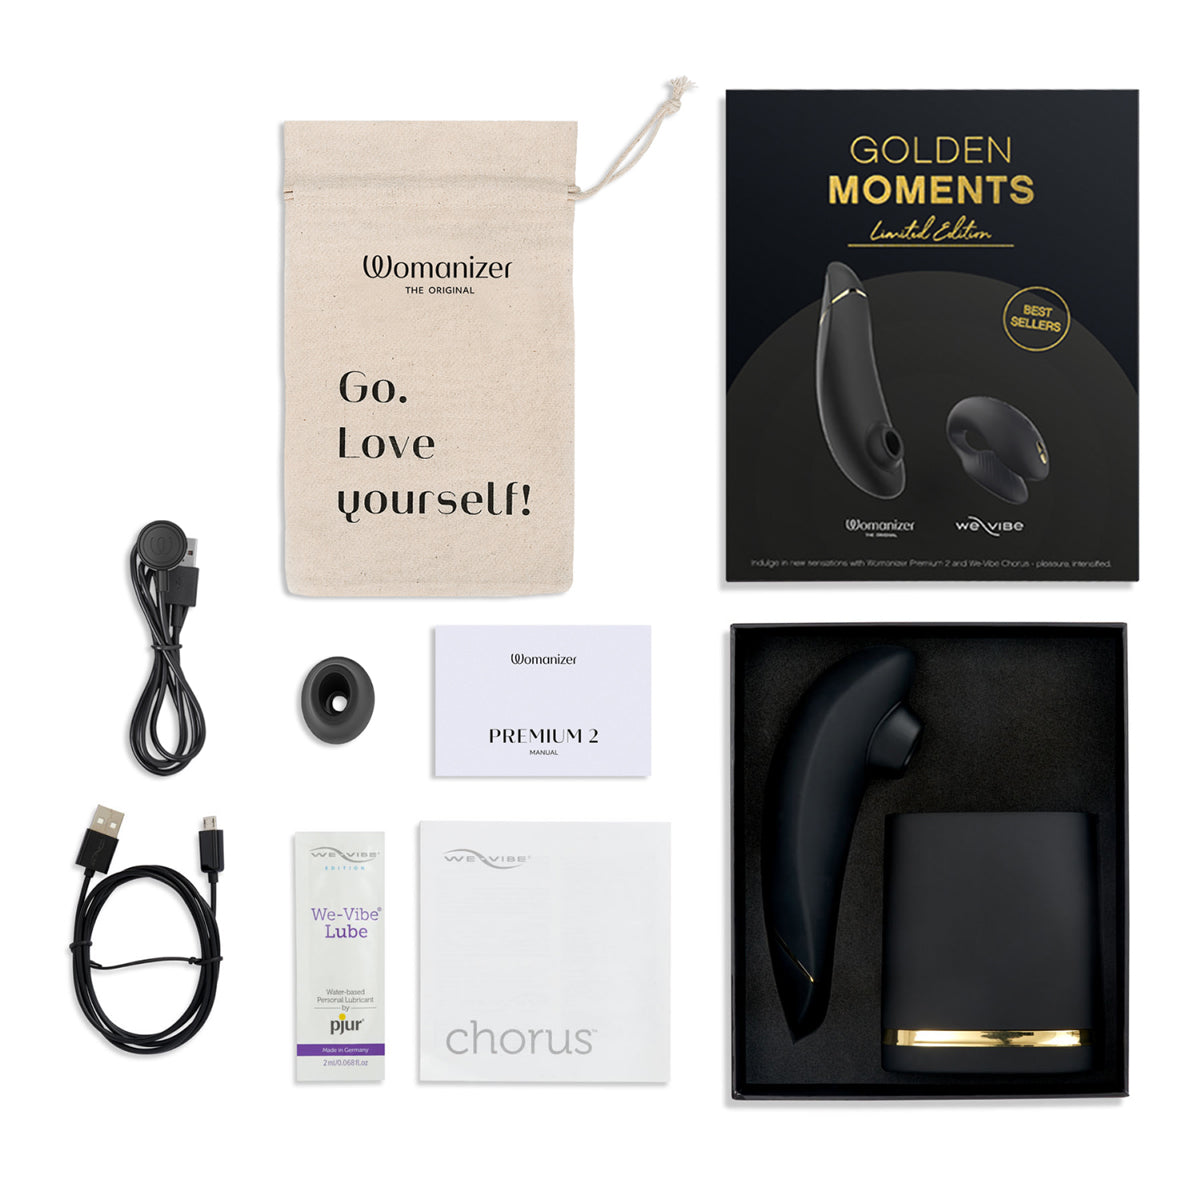 Womanizer & We-Vibe Golden Moments 2.0 Limited Edition Gift Set